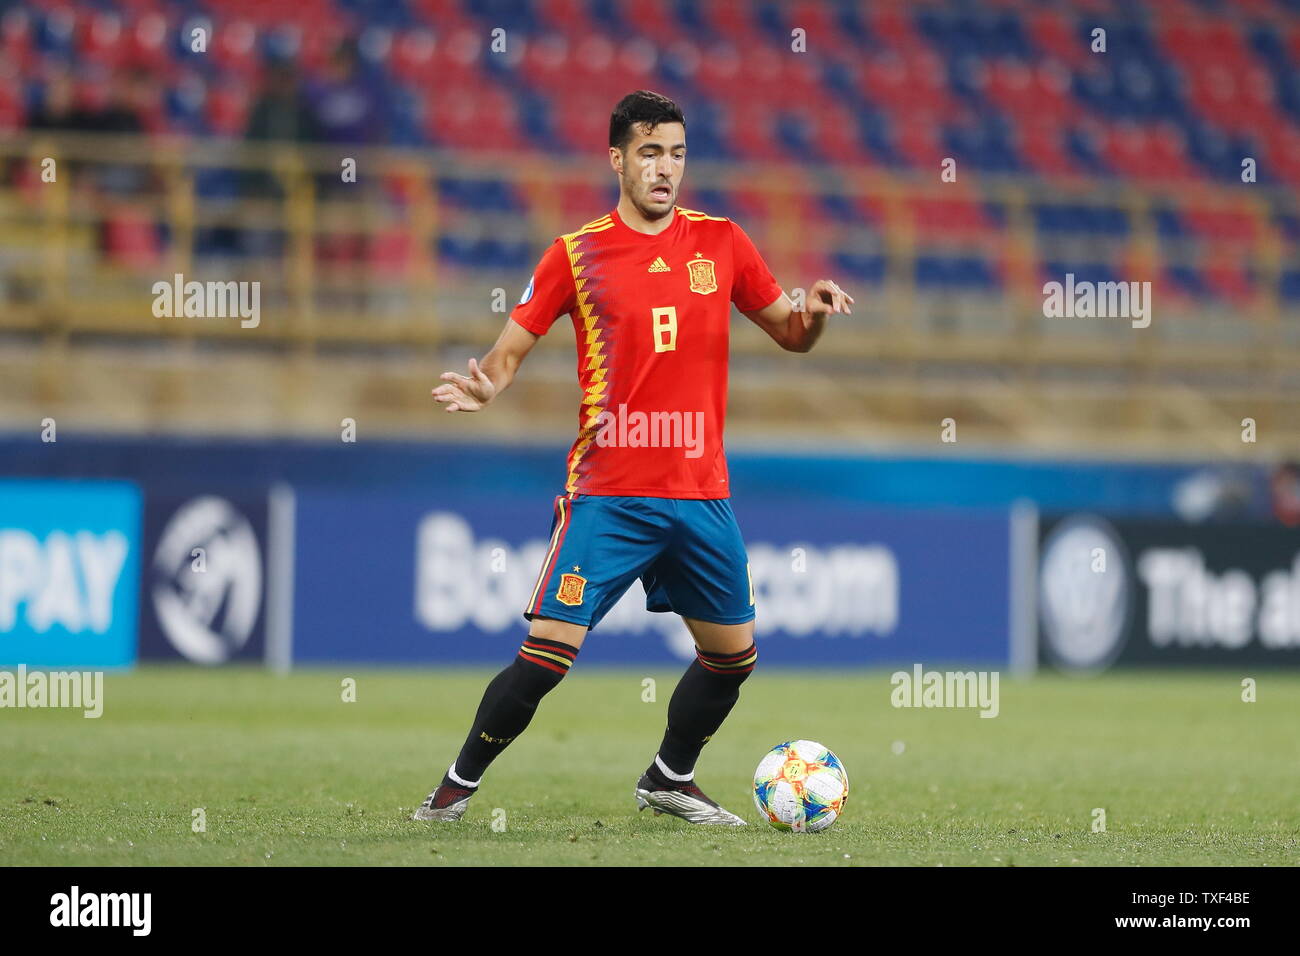 the Stadio Renato Dall'Ara, Bologna, Italy. 22nd June, 2019. Mikel Merino (ESP), JUNE 22, 2019 - Football/Soccer : UEFA European Under-21 Championship 2019 Group stage match between Under-21 Spain 5-0 Under-21 Poland at the Stadio Renato Dall'Ara, Bologna, Italy. Credit: Mutsu Kawamori/AFLO/Alamy Live News Stock Photo